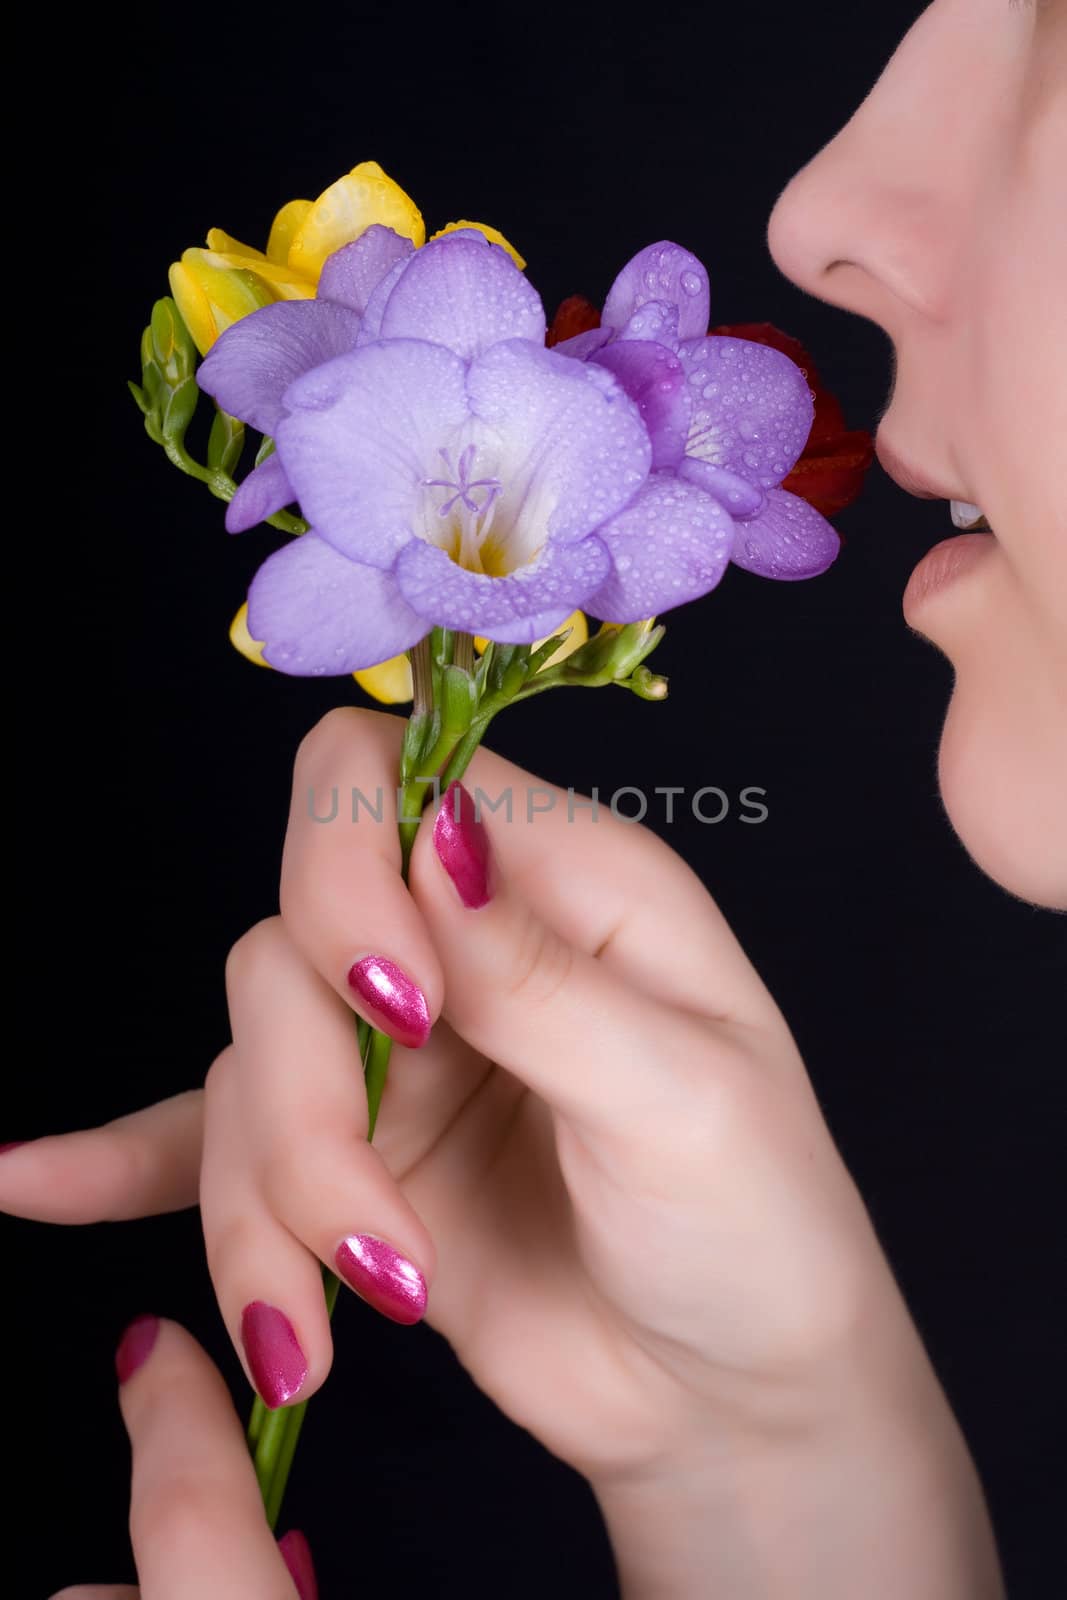 Woman sniffing flowers, freesia  by Irina1977